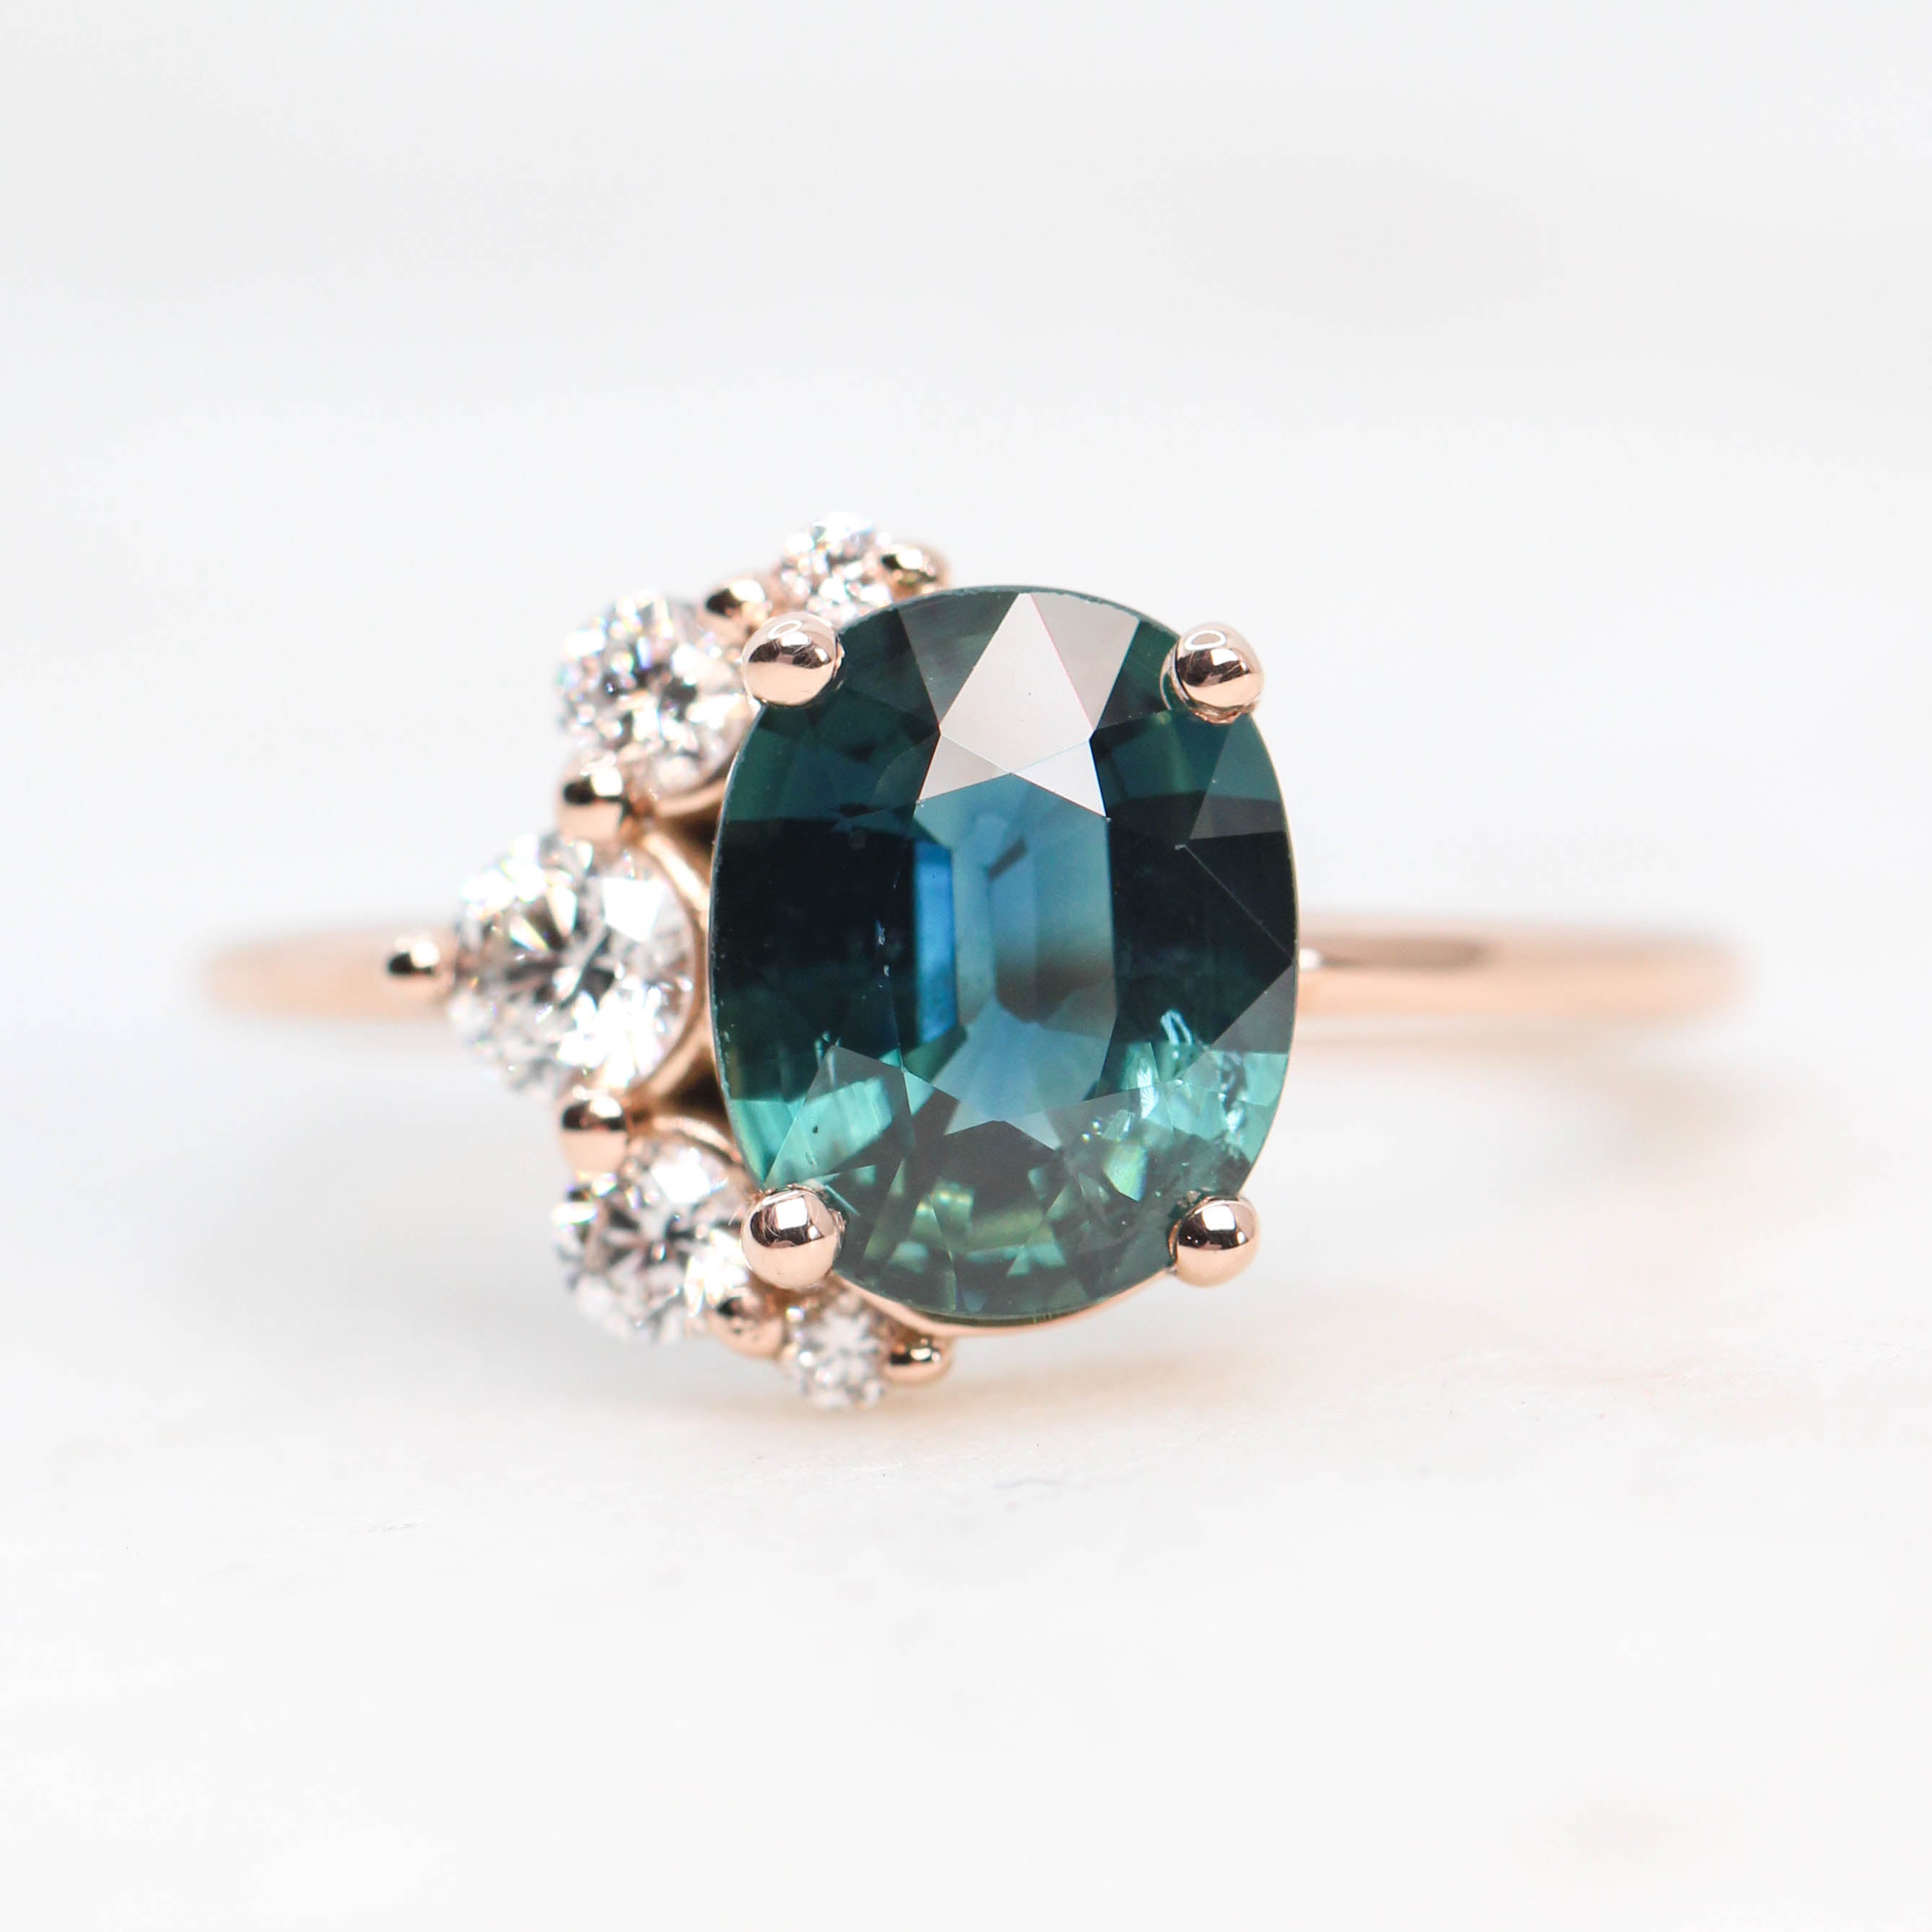 Carell Ring with a 2.01 Carat Teal Oval Sapphire and White Accent Diamonds in 14k Rose Gold - Ready to Size and Ship - Midwinter Co. Alternative Bridal Rings and Modern Fine Jewelry